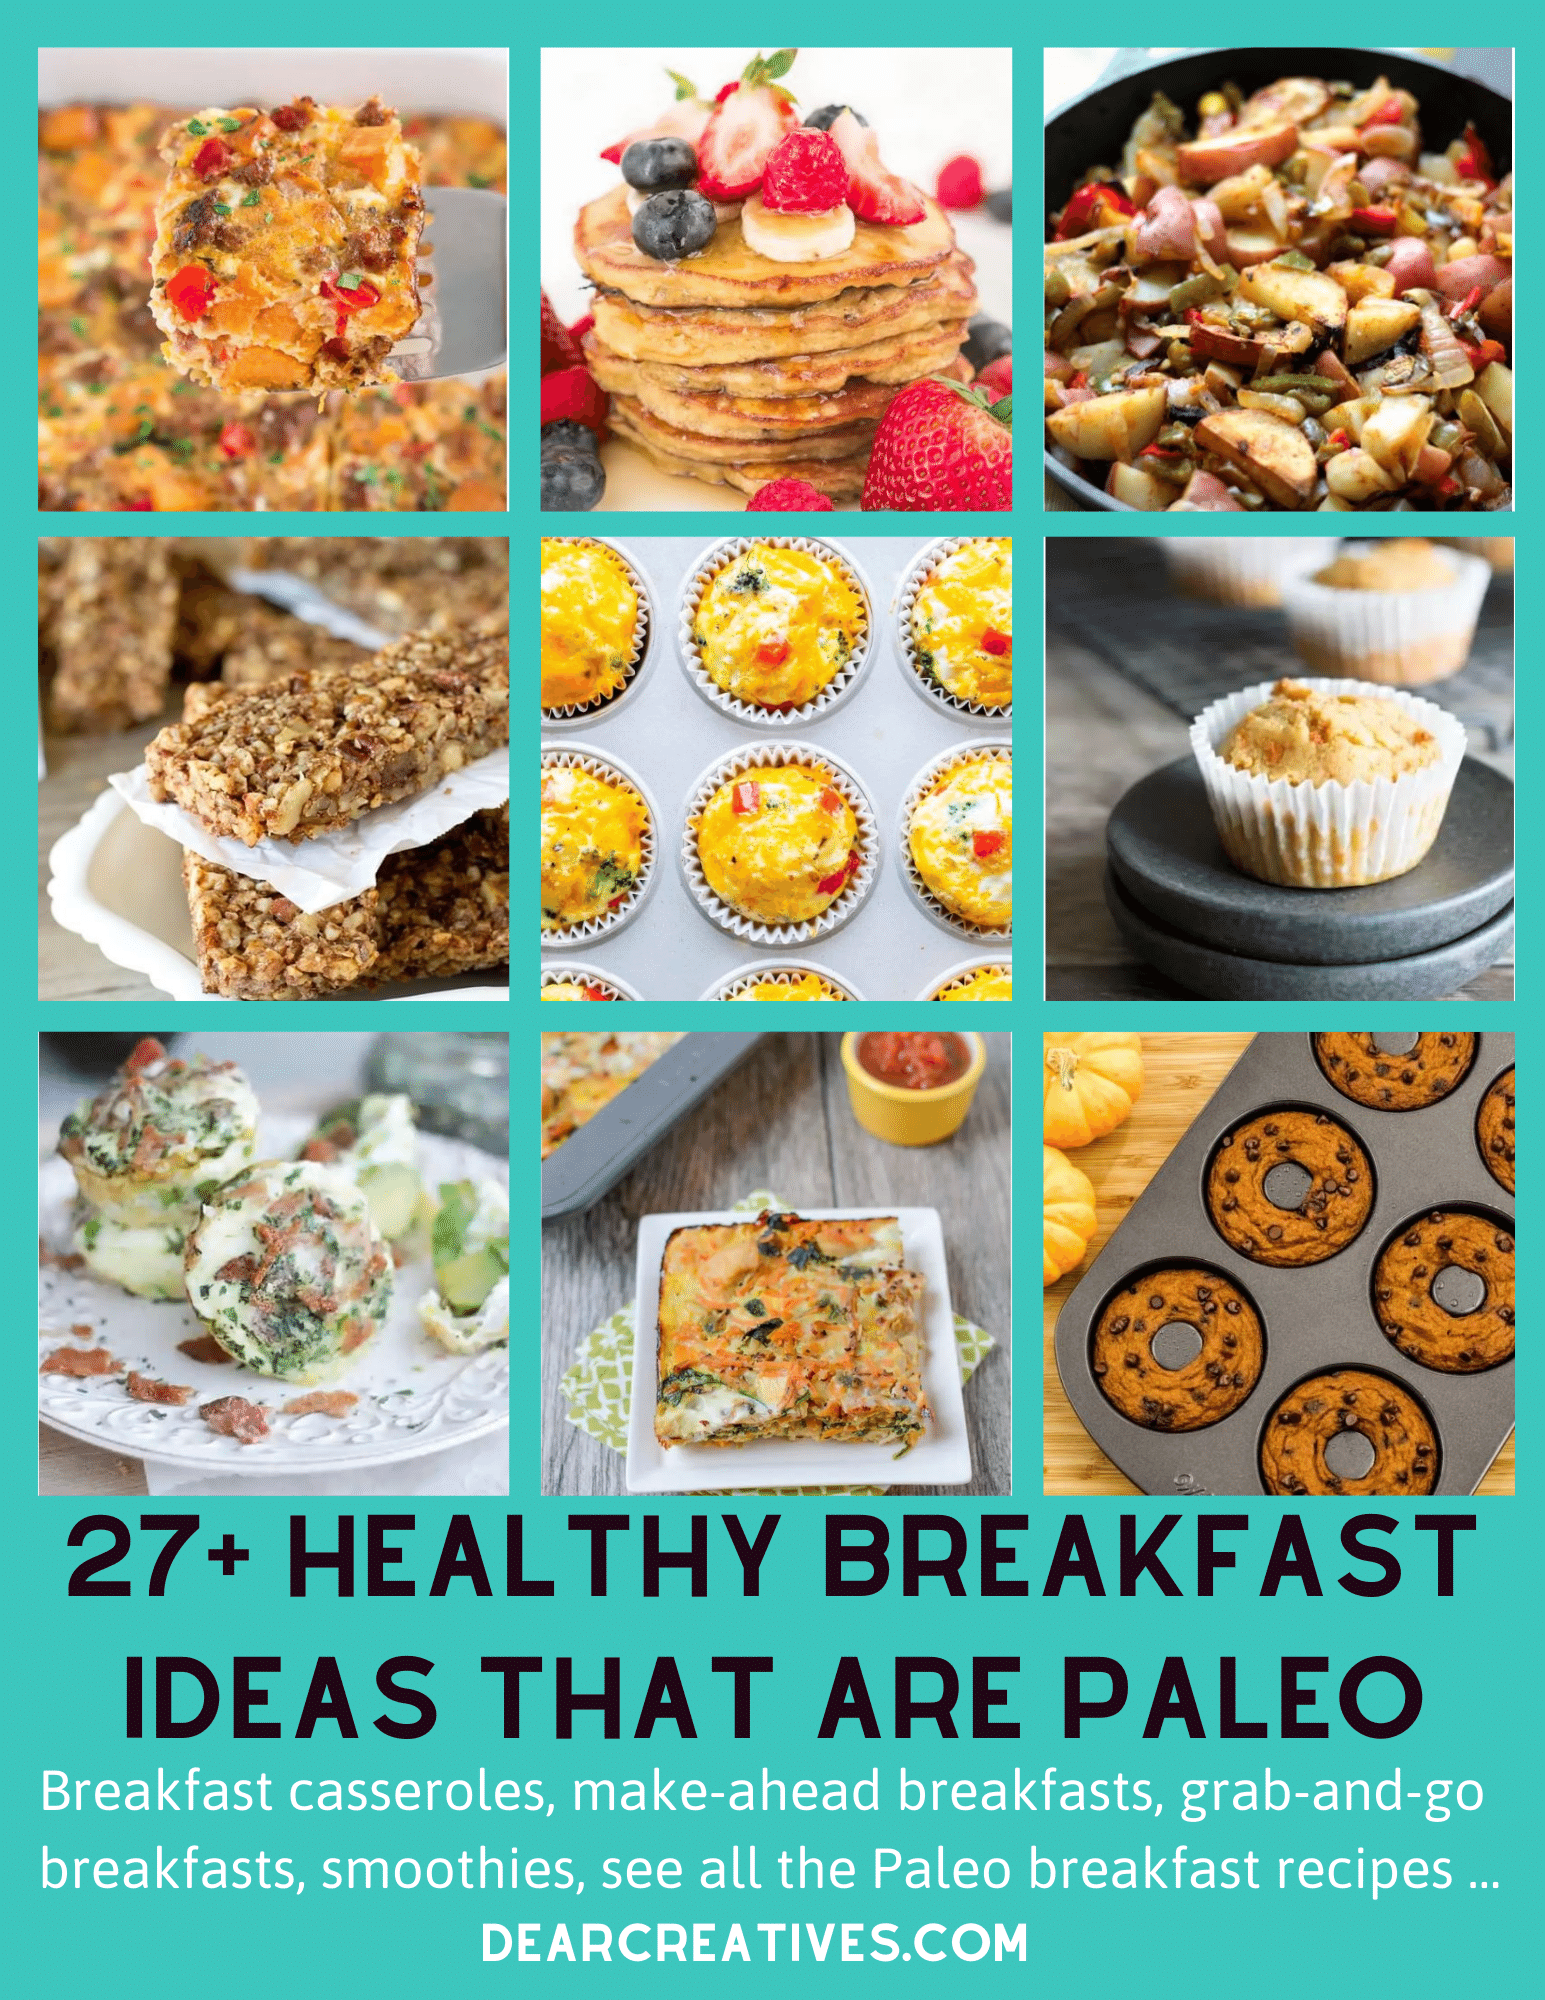 27+ Healthy Breakfast Ideas That Are Paleo!